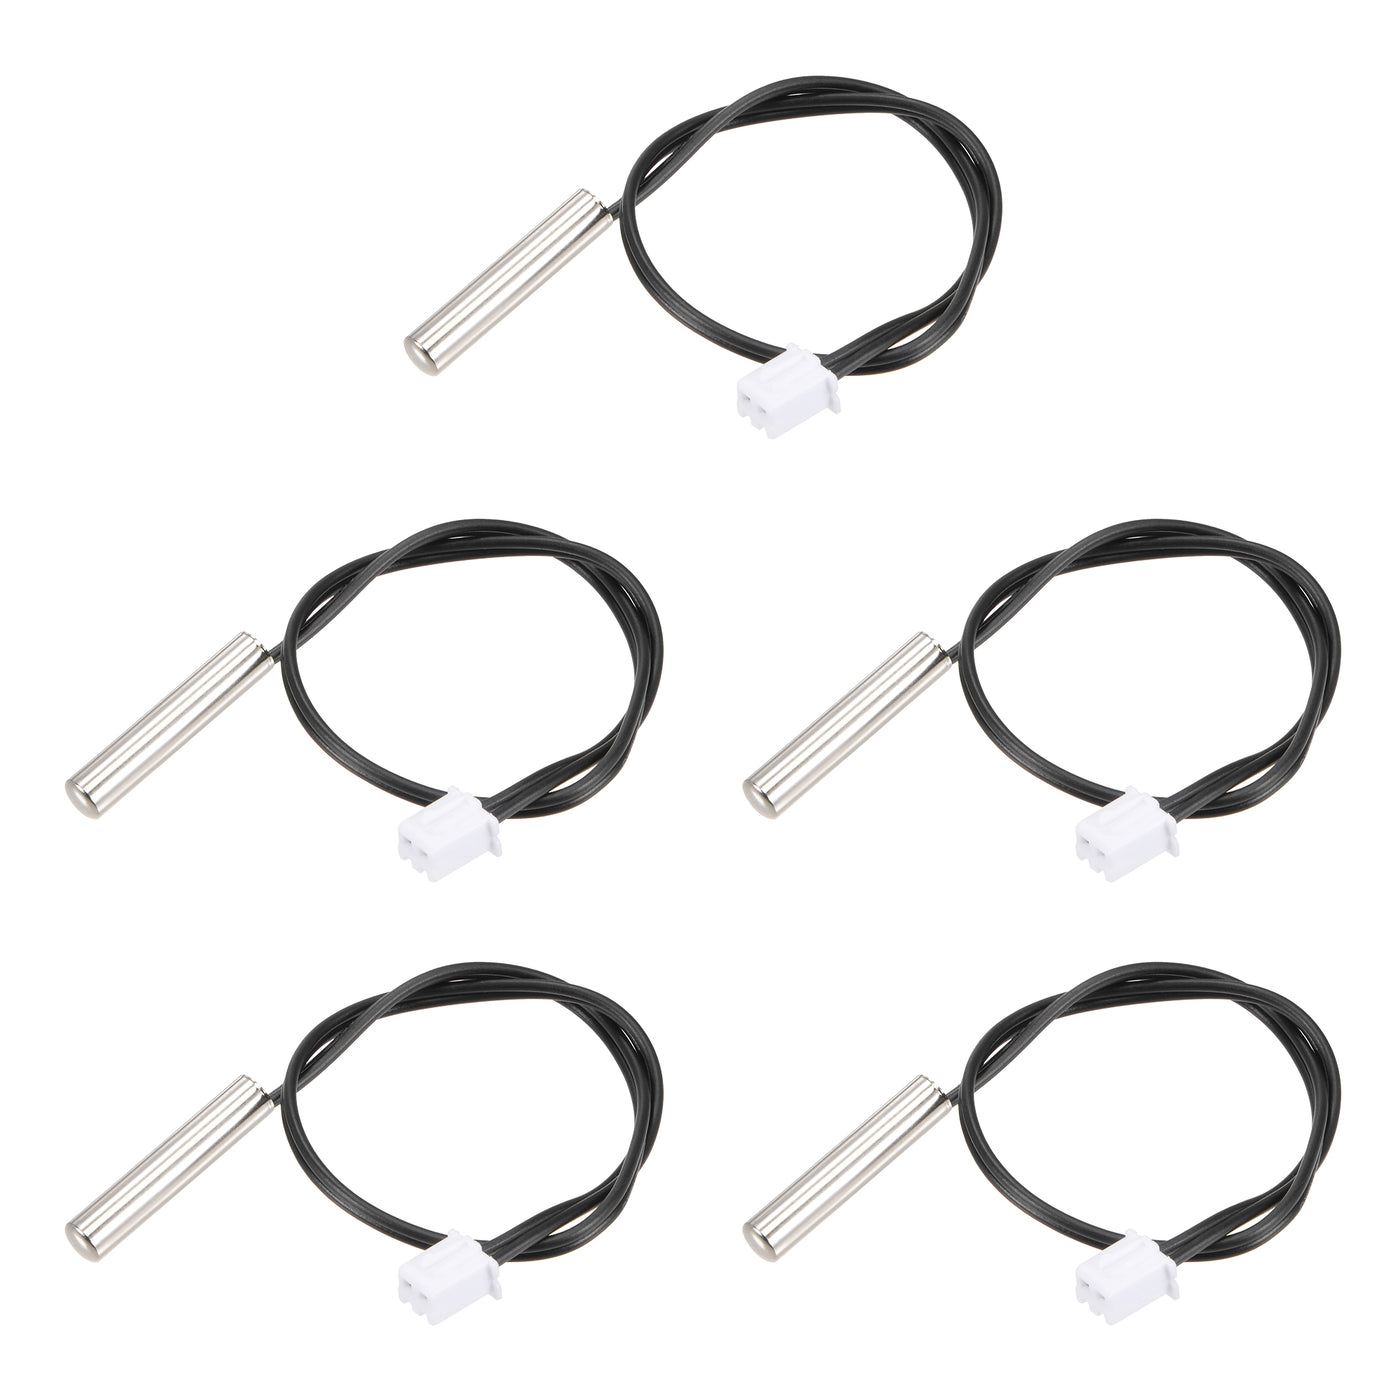 uxcell Uxcell 5pcs 20K Temperature Sensor Probe, Stainless Steel NTC Thermal Sensor Probe 200mm Digital Thermometer Extension Cable